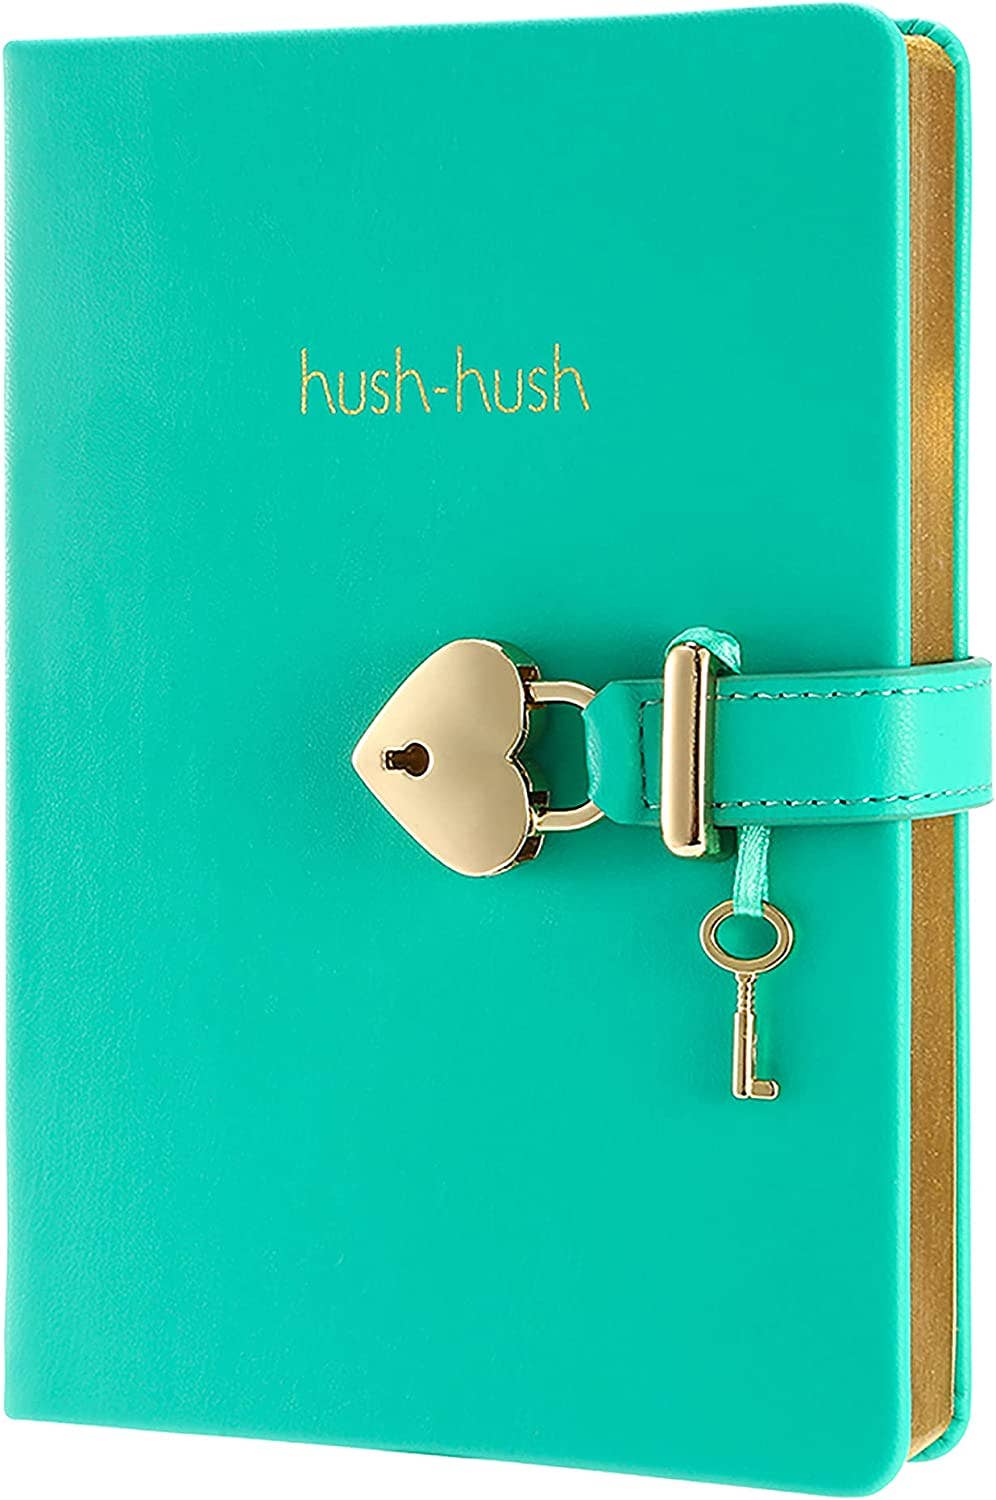 Heart Lock Diary for Girls with Key, Vegan Cover (Mint)